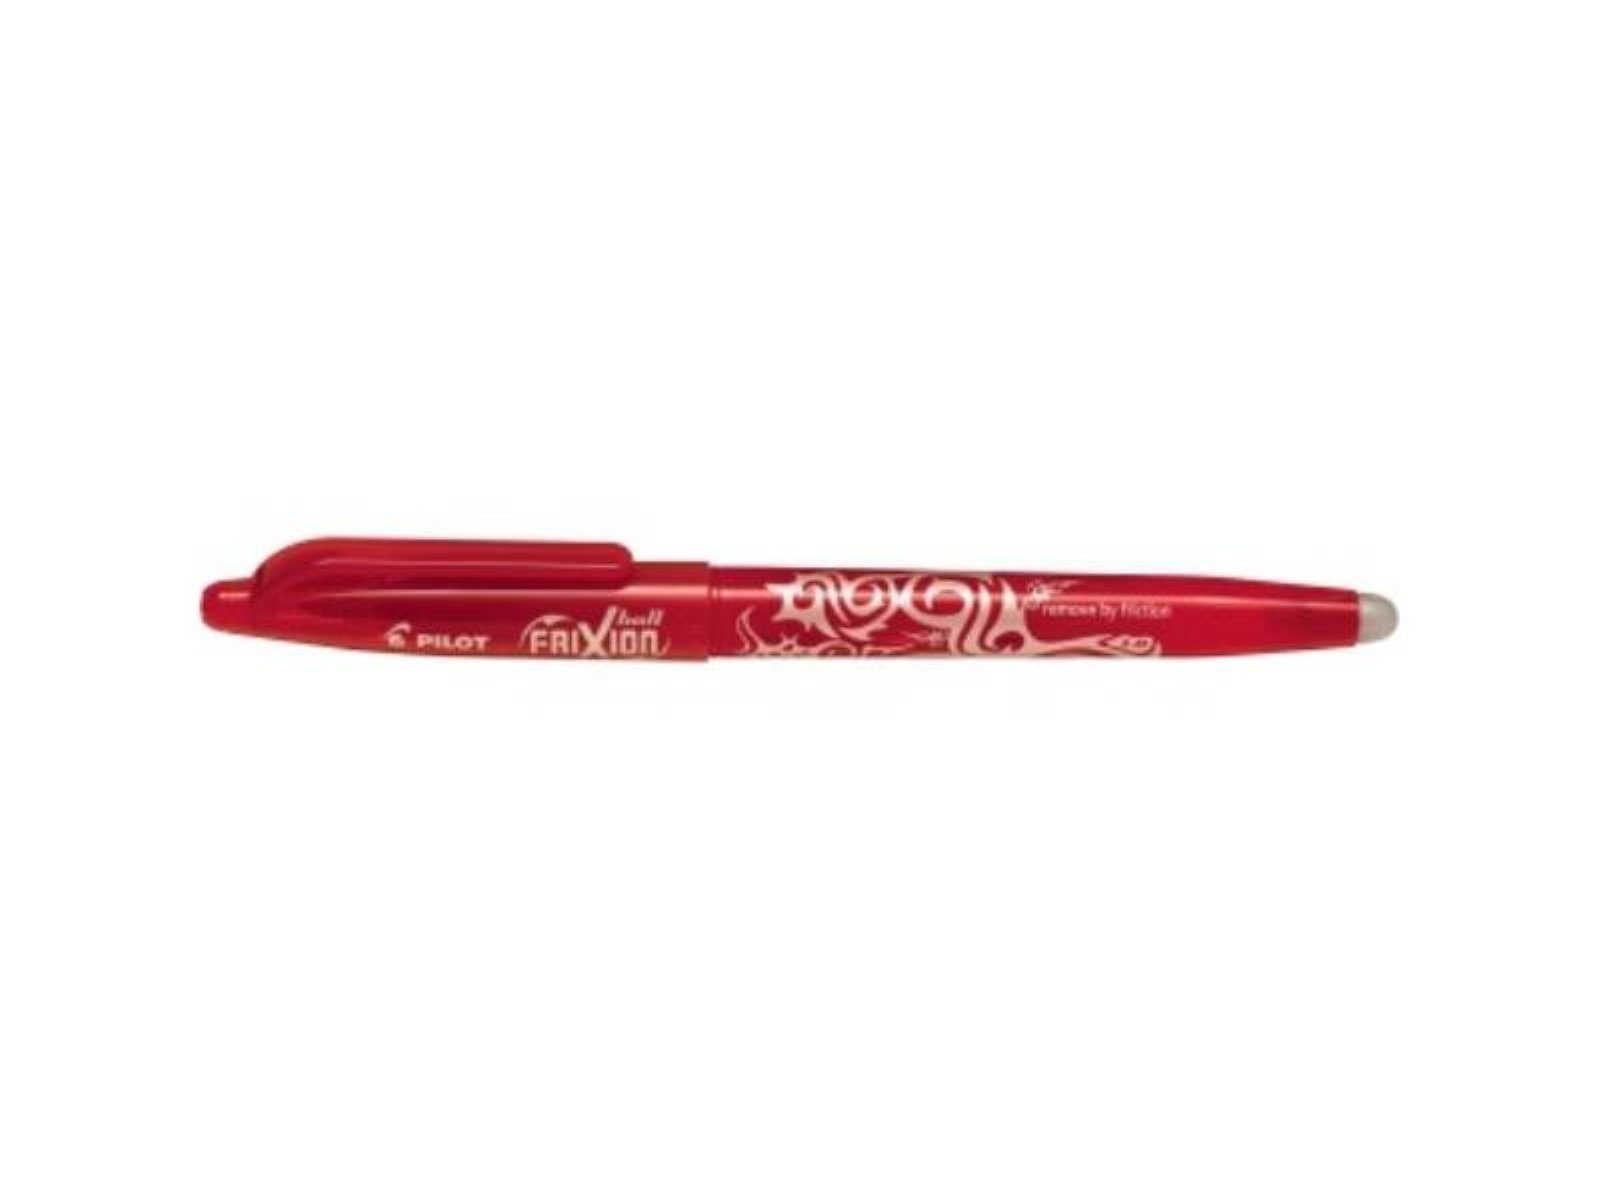 PILOT Tintenroller PILOT 2258002 Tintenroller 1.0 Ball PILOT rot 0,5mm Rundspitze FriXion